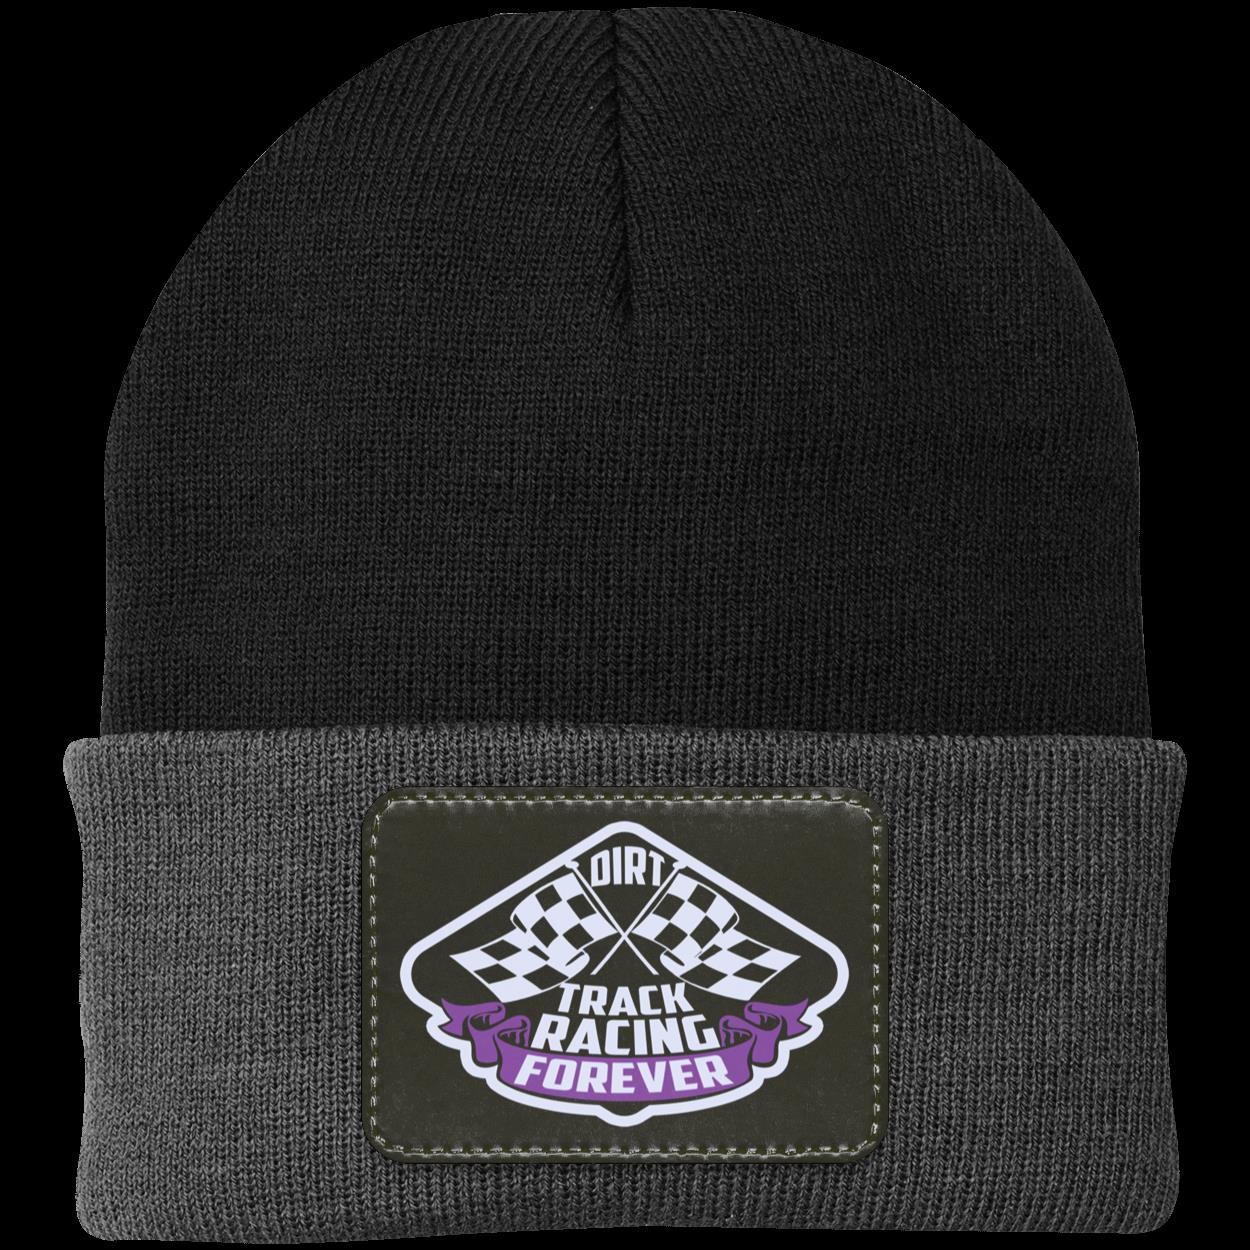 Dirt Track Racing Forever Patched Knit Cap V2